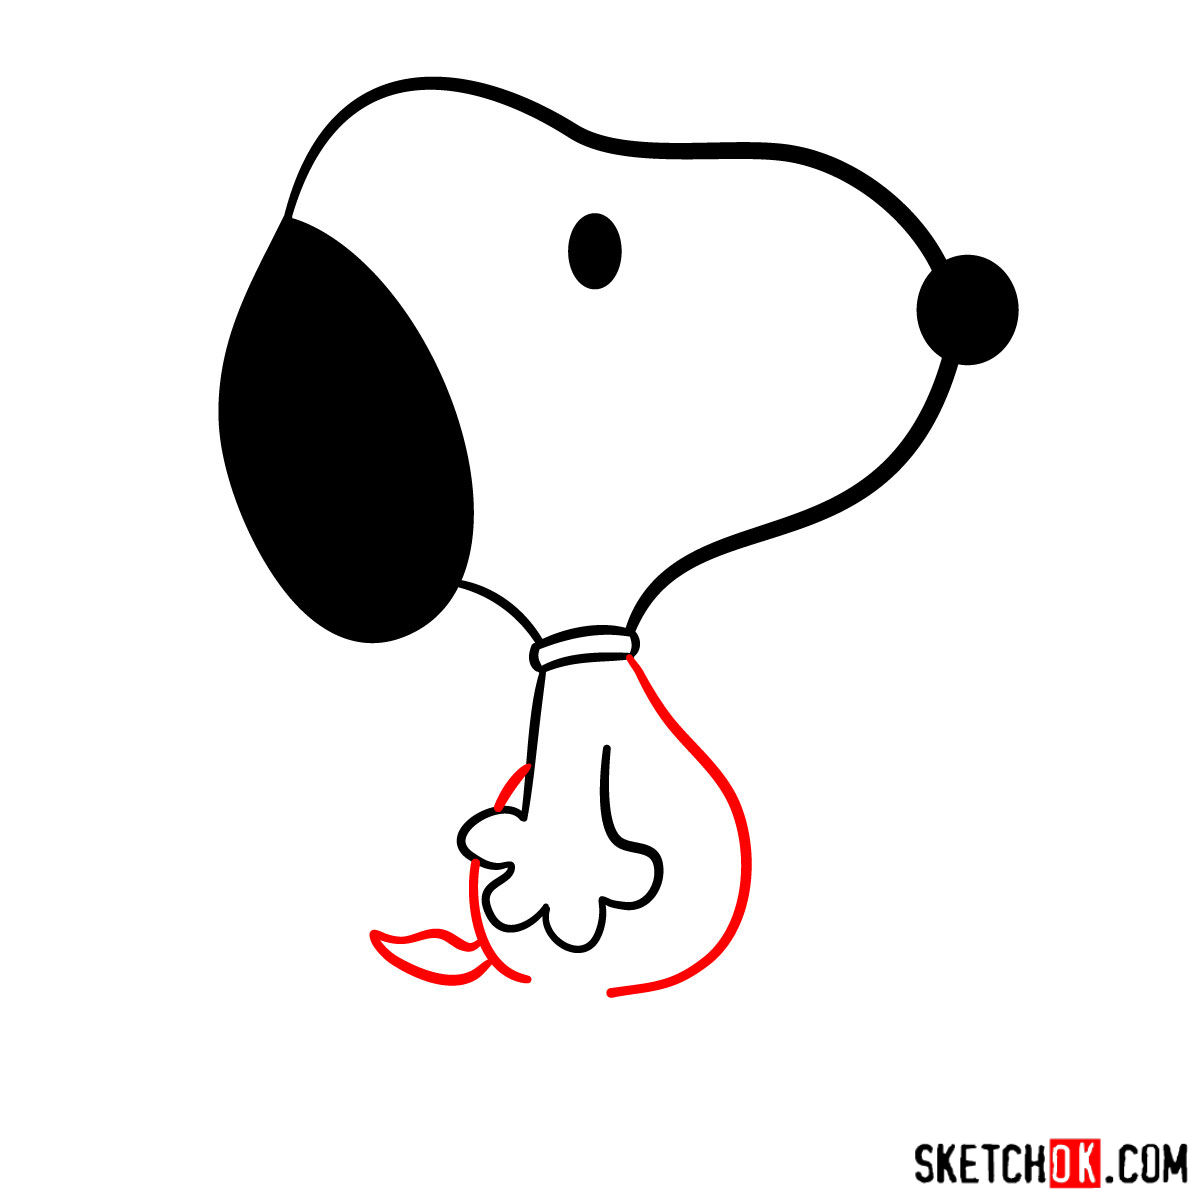 How to draw Snoopy - step 04